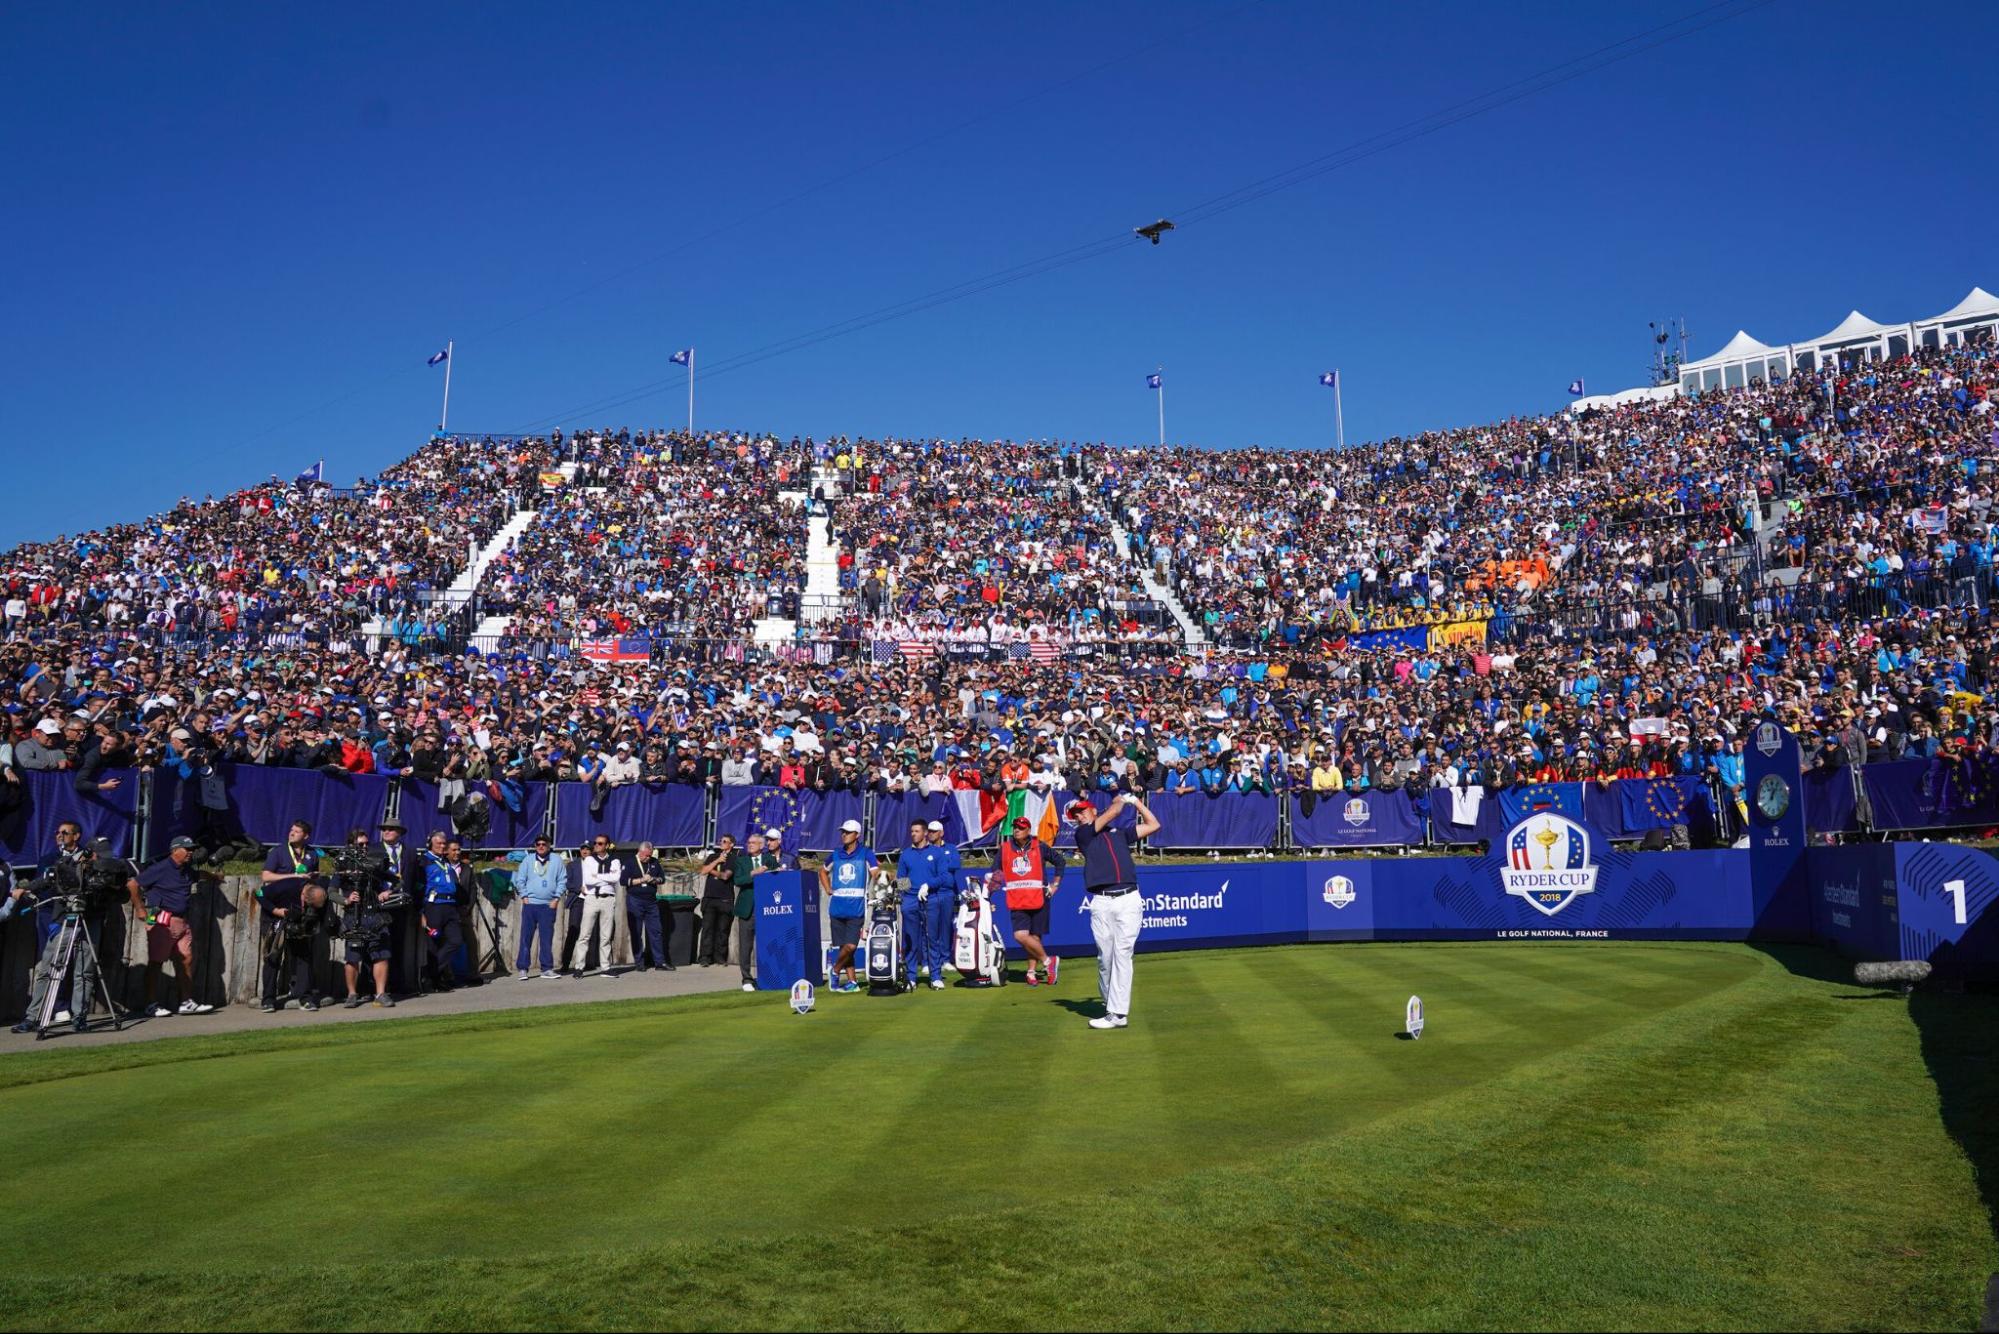 DP World Tour: Rory McIlroy to make Italian Open debut in September at 2023  Ryder Cup venue, Golf News